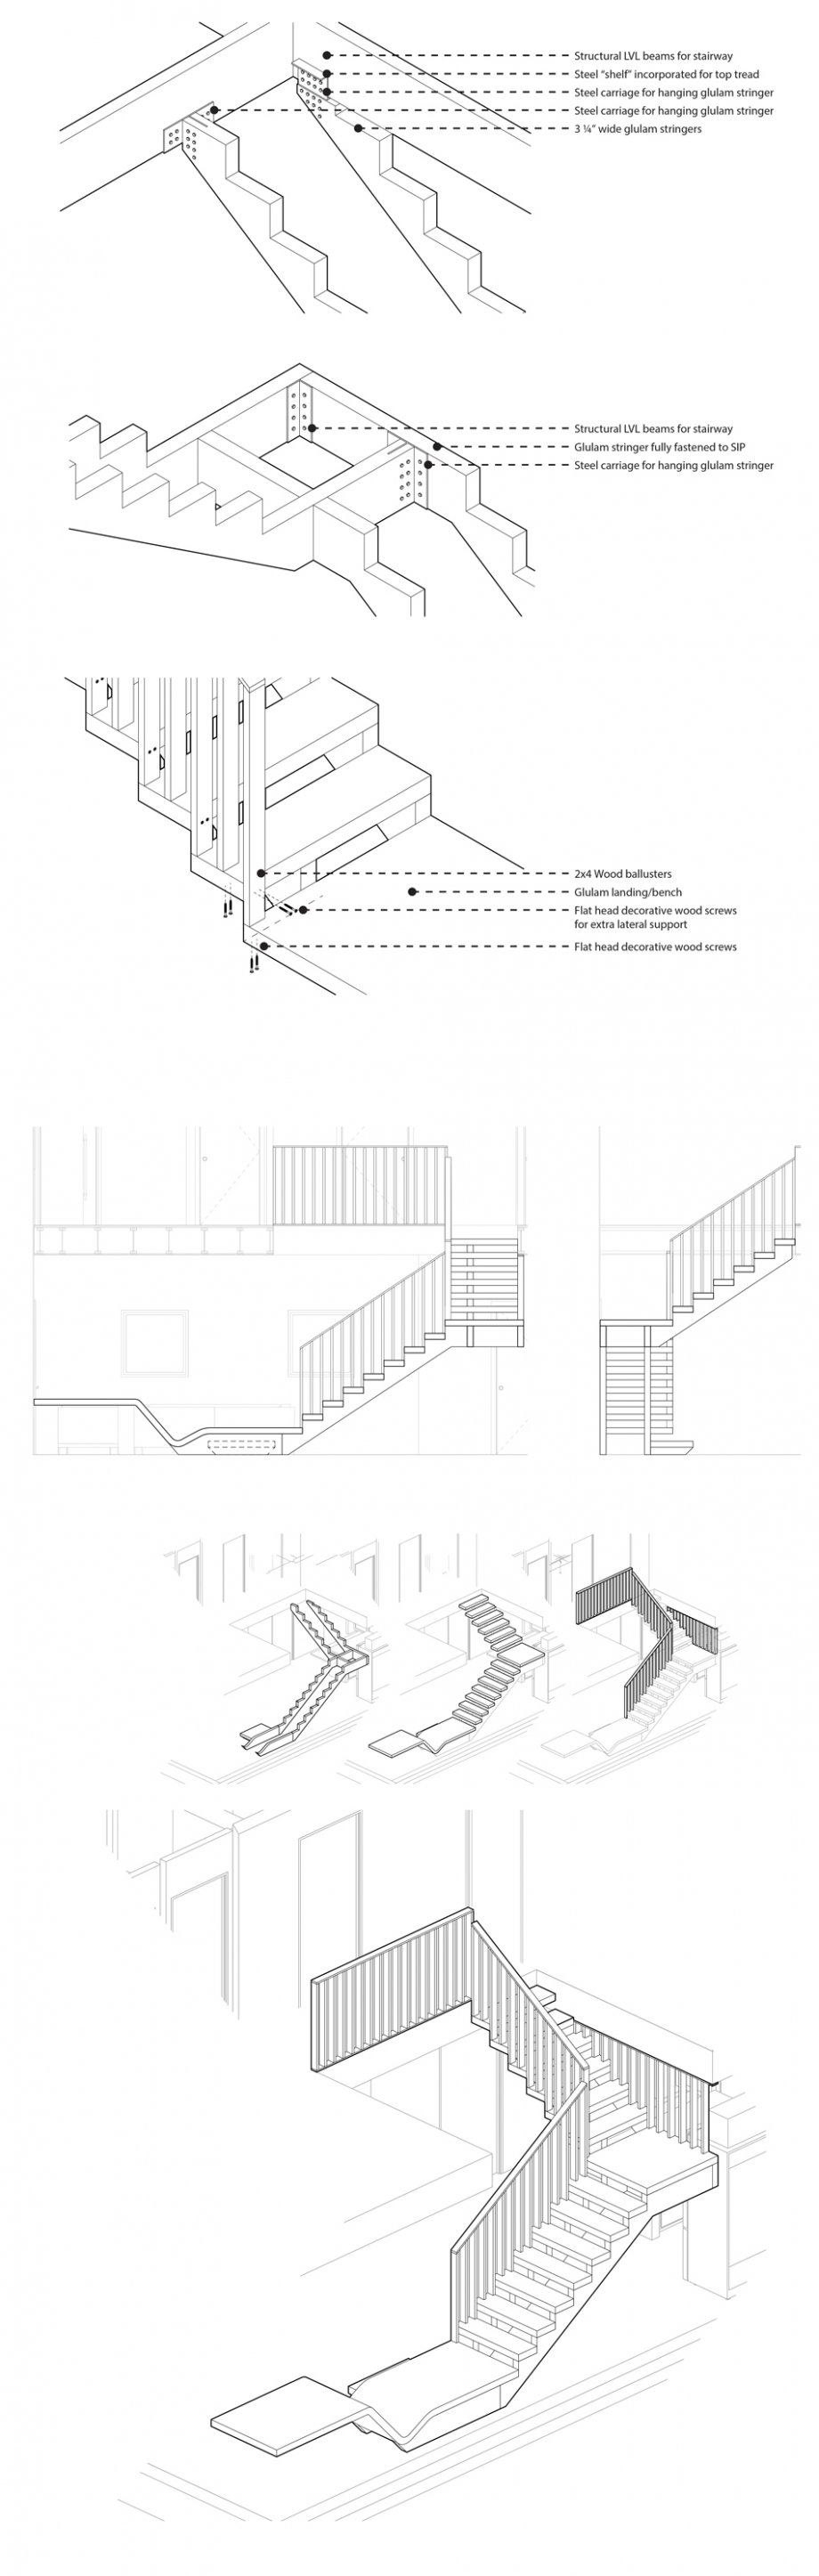 Custom stair design and details on structure and assembly.